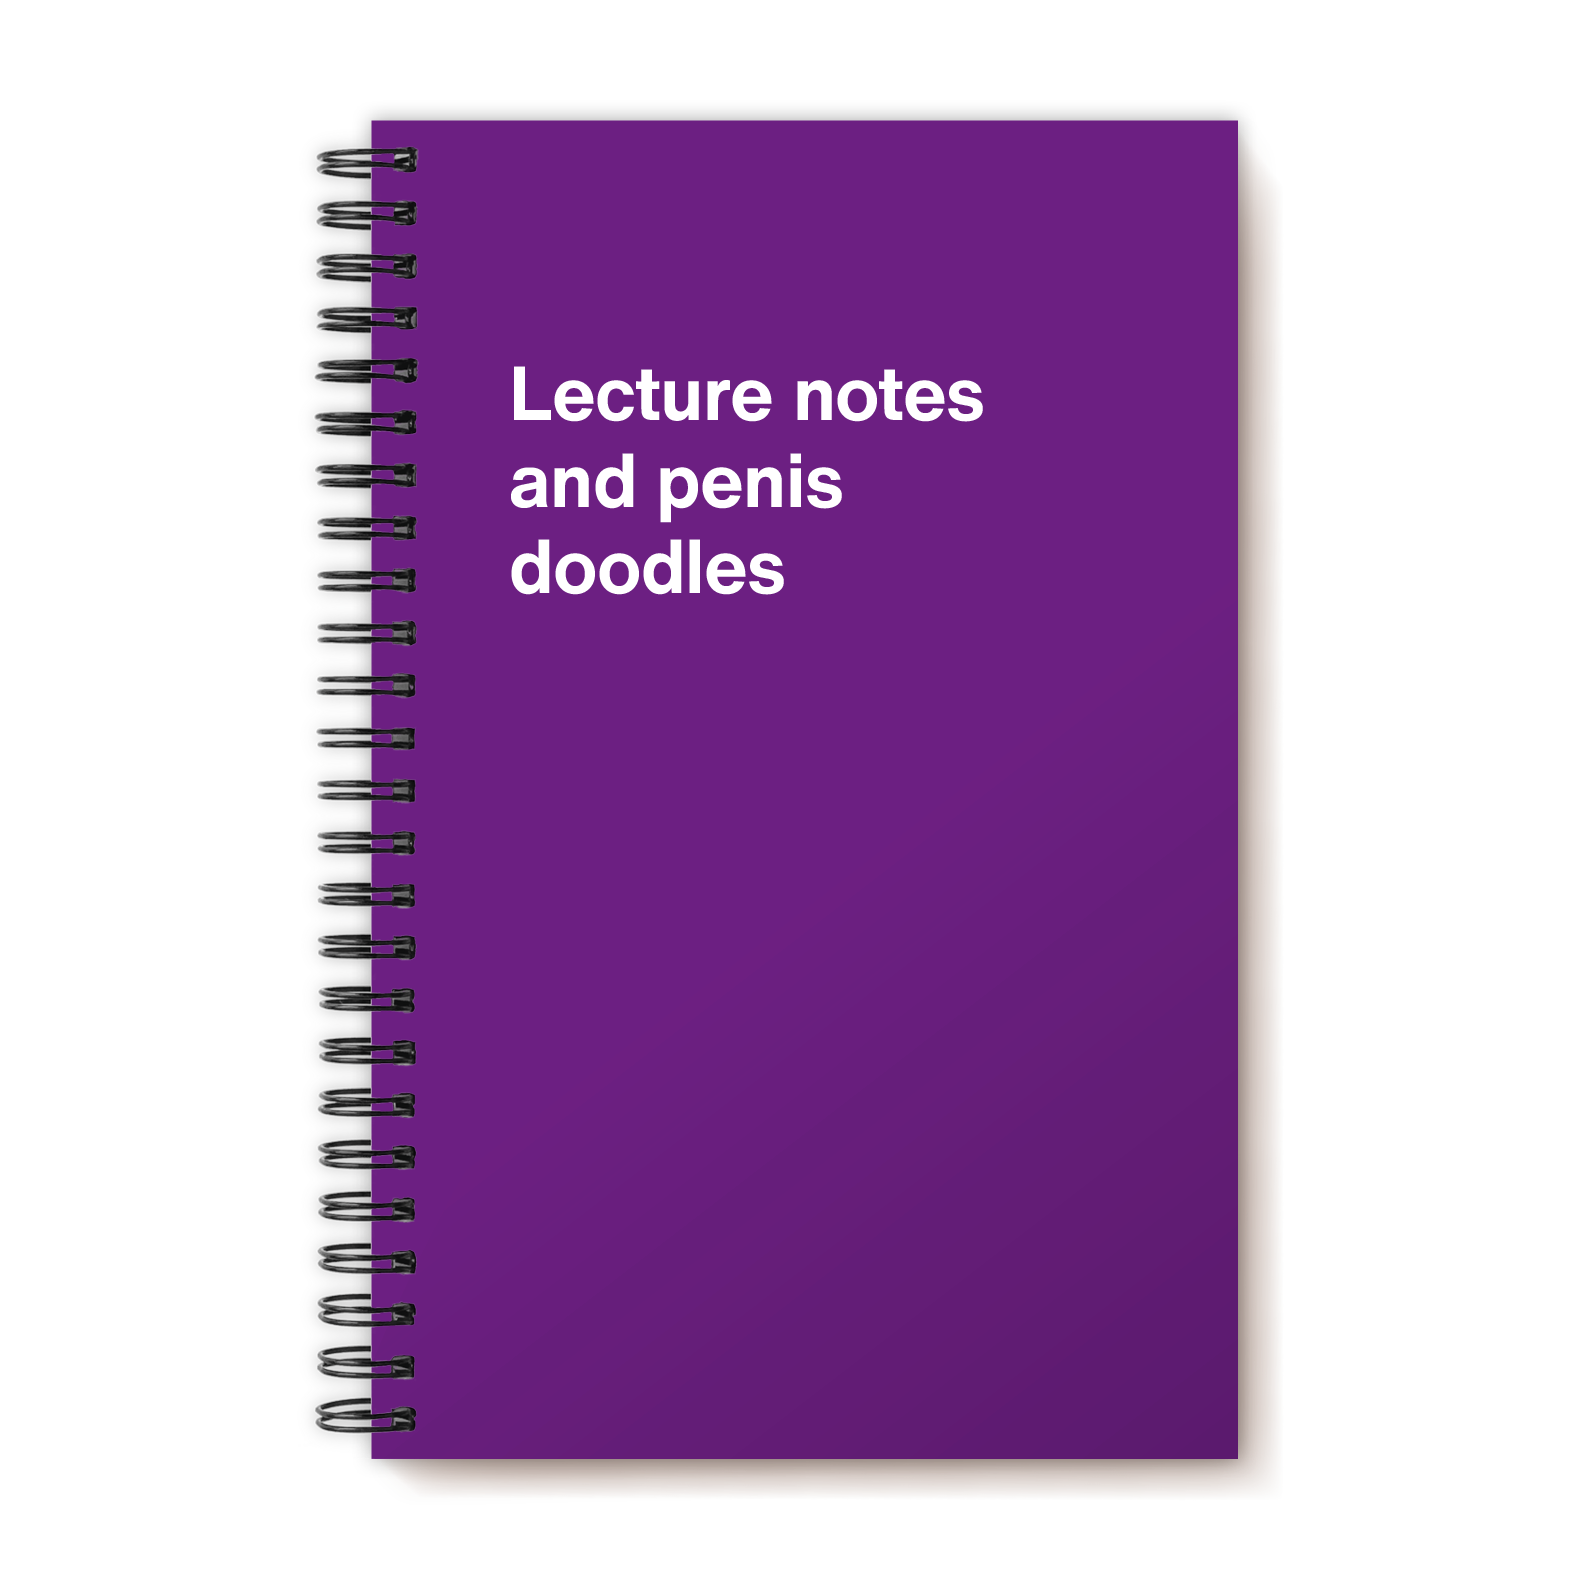 Lecture notes and penis doodles | WTF Notebooks